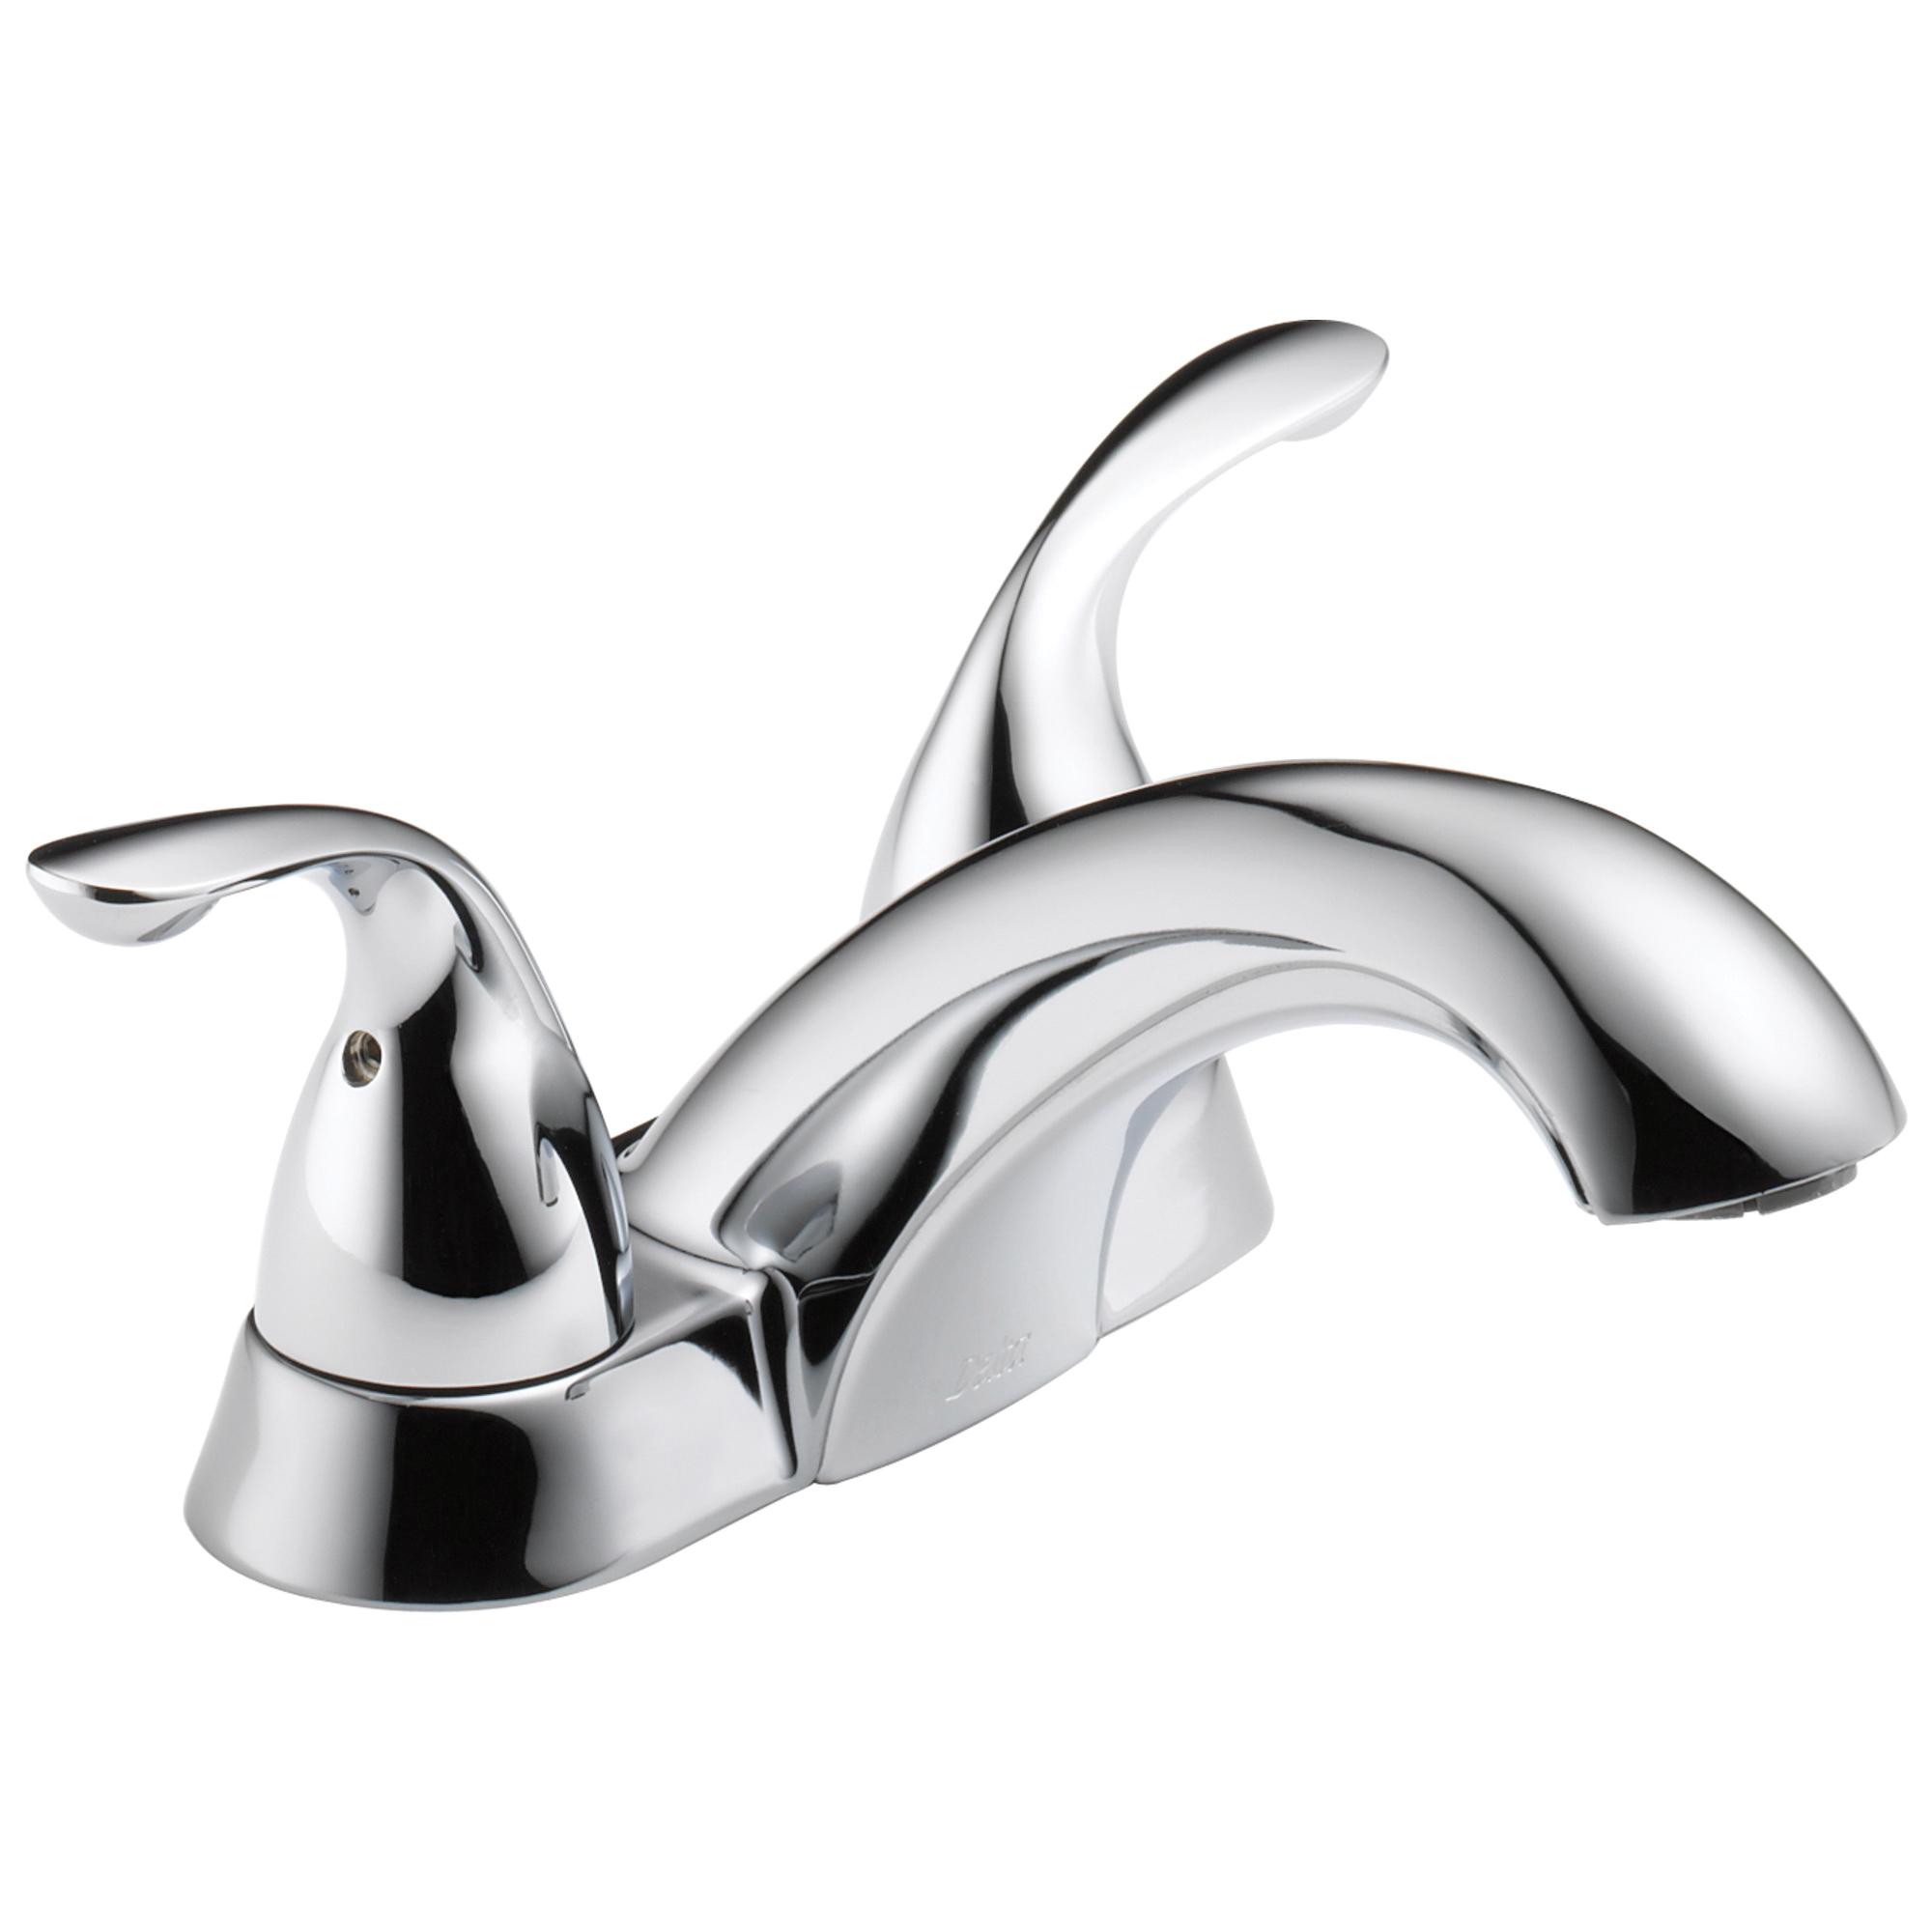 2503LF Centerset Lavatory Faucet, Classic, Chrome Plated, 2 Handles, 1.2 gpm - Discontinued